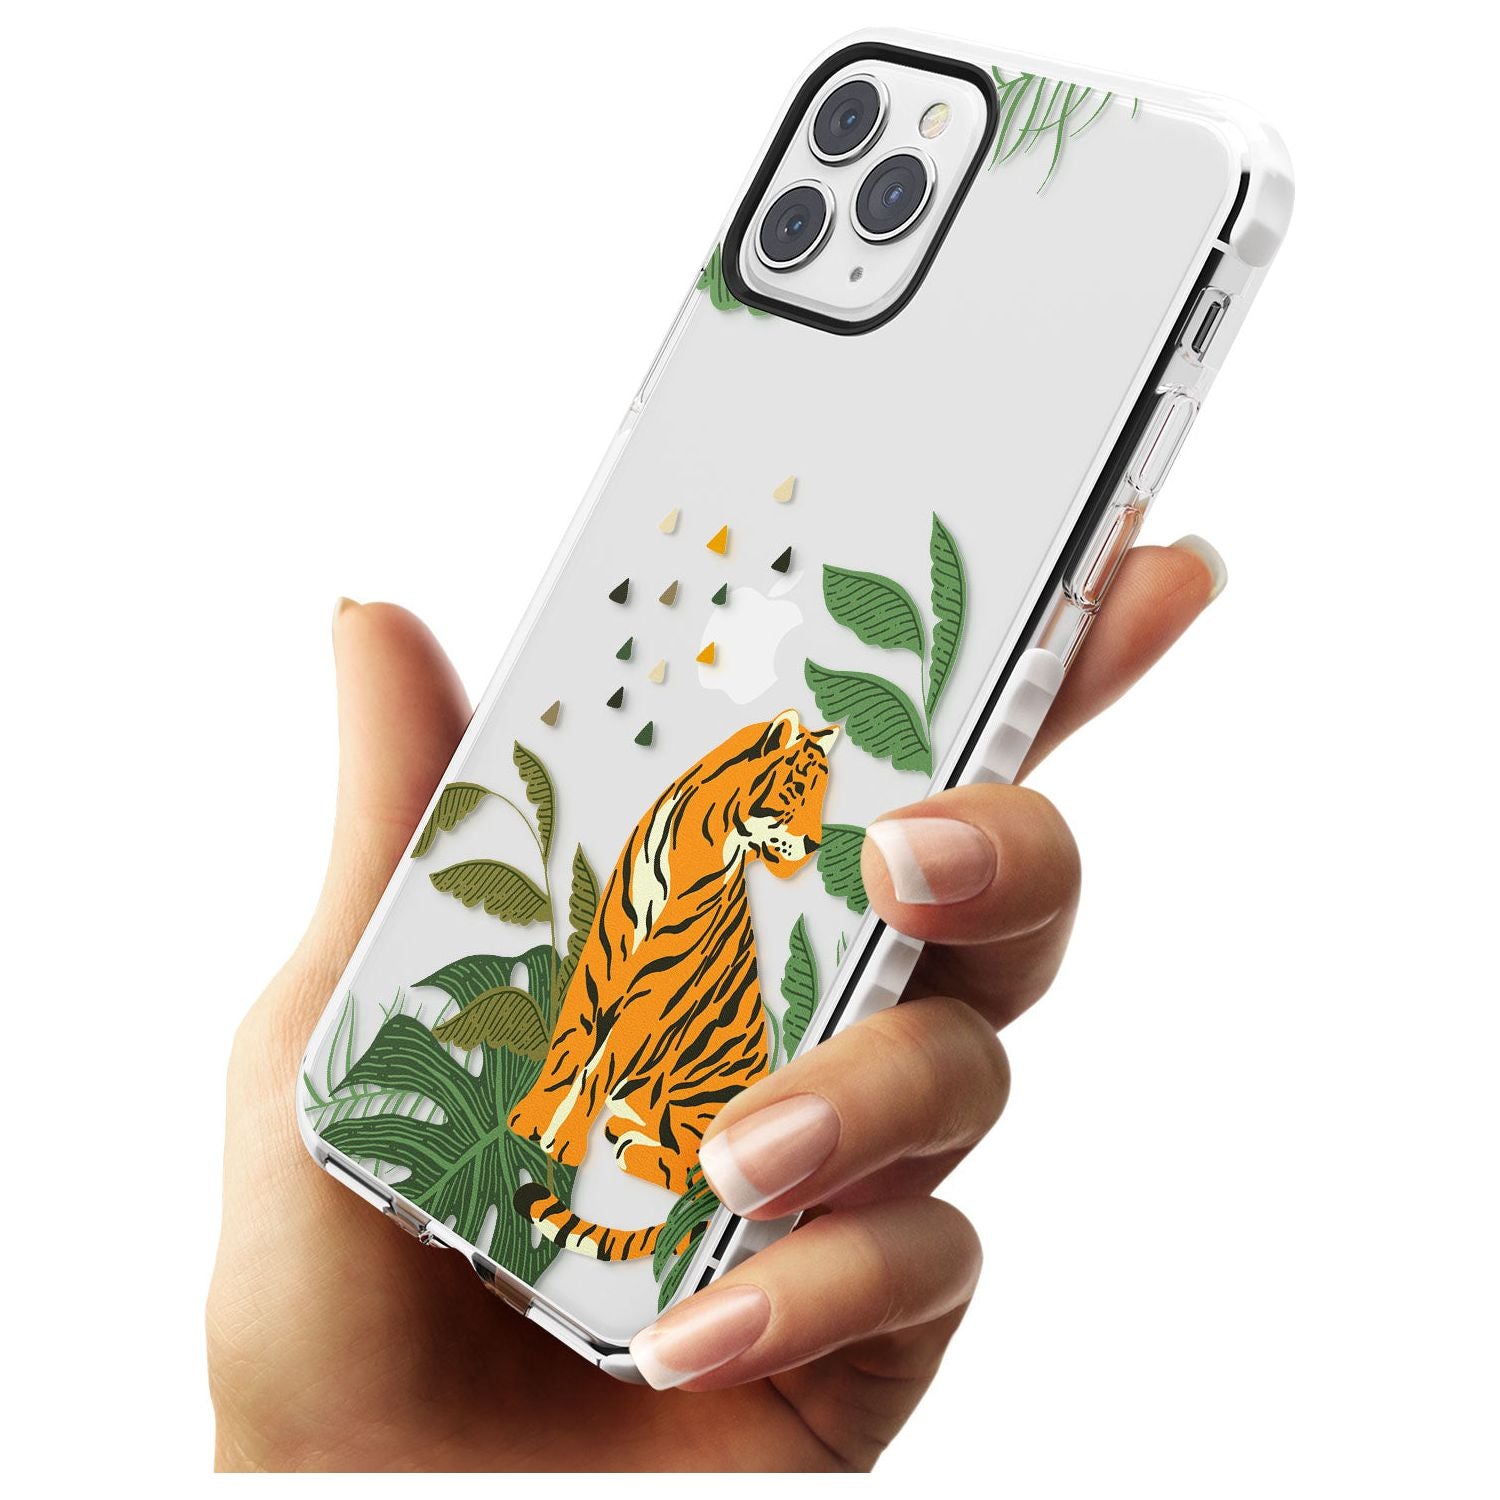 Large Tiger Clear Jungle Cat Pattern Impact Phone Case for iPhone 11 Pro Max